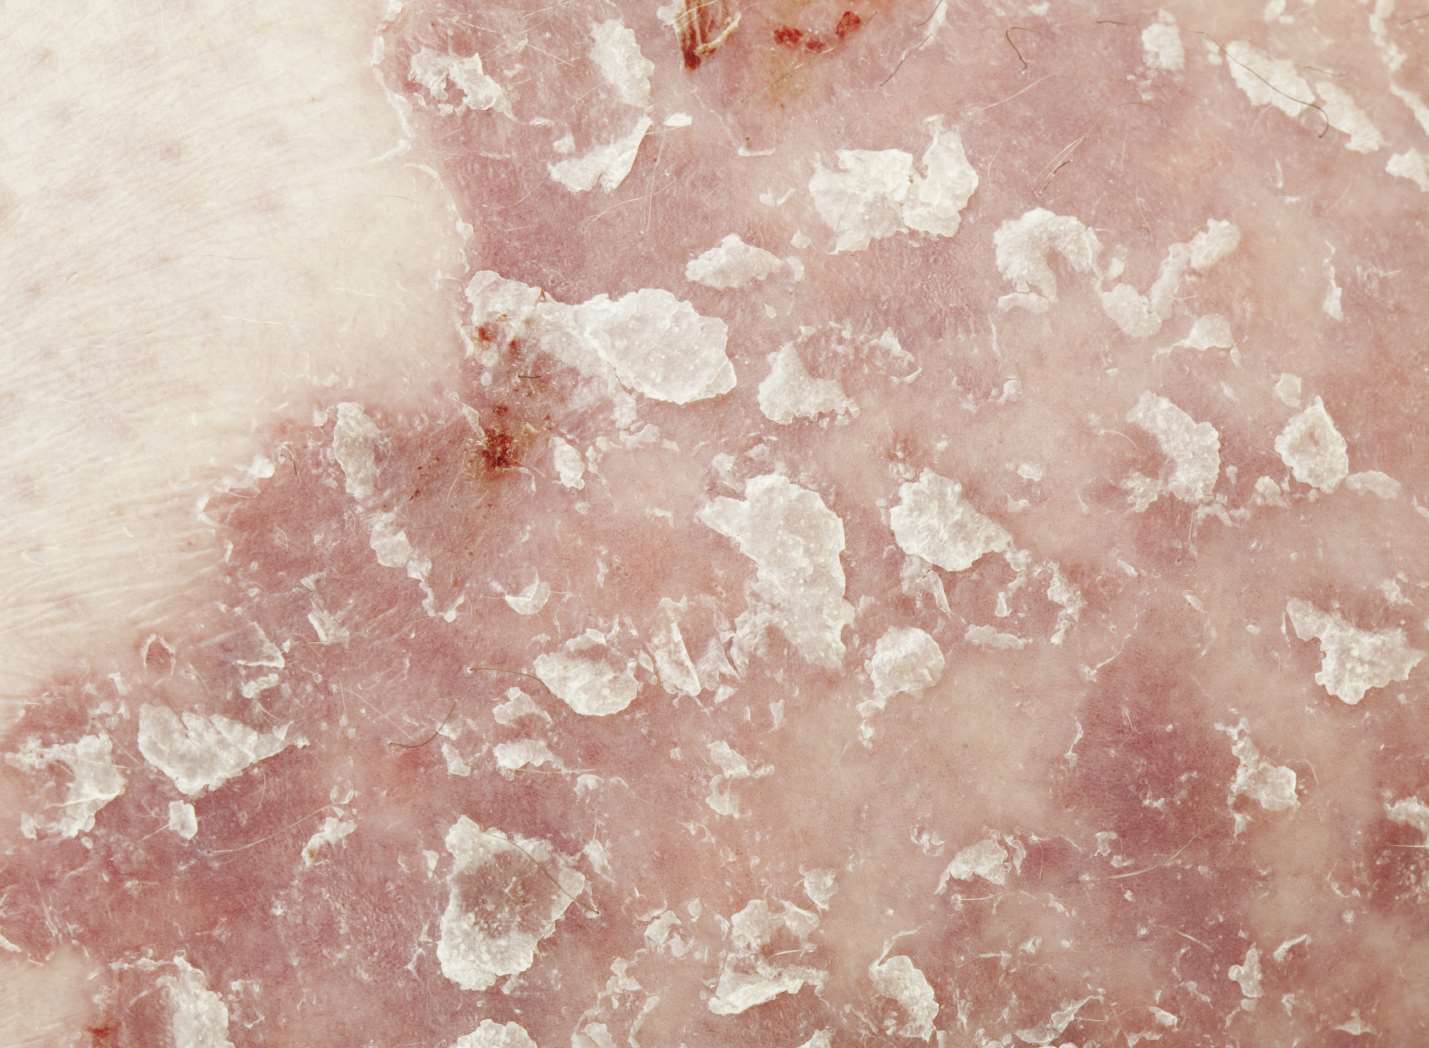 A close-up of the skin condition psoriasis.Stock image